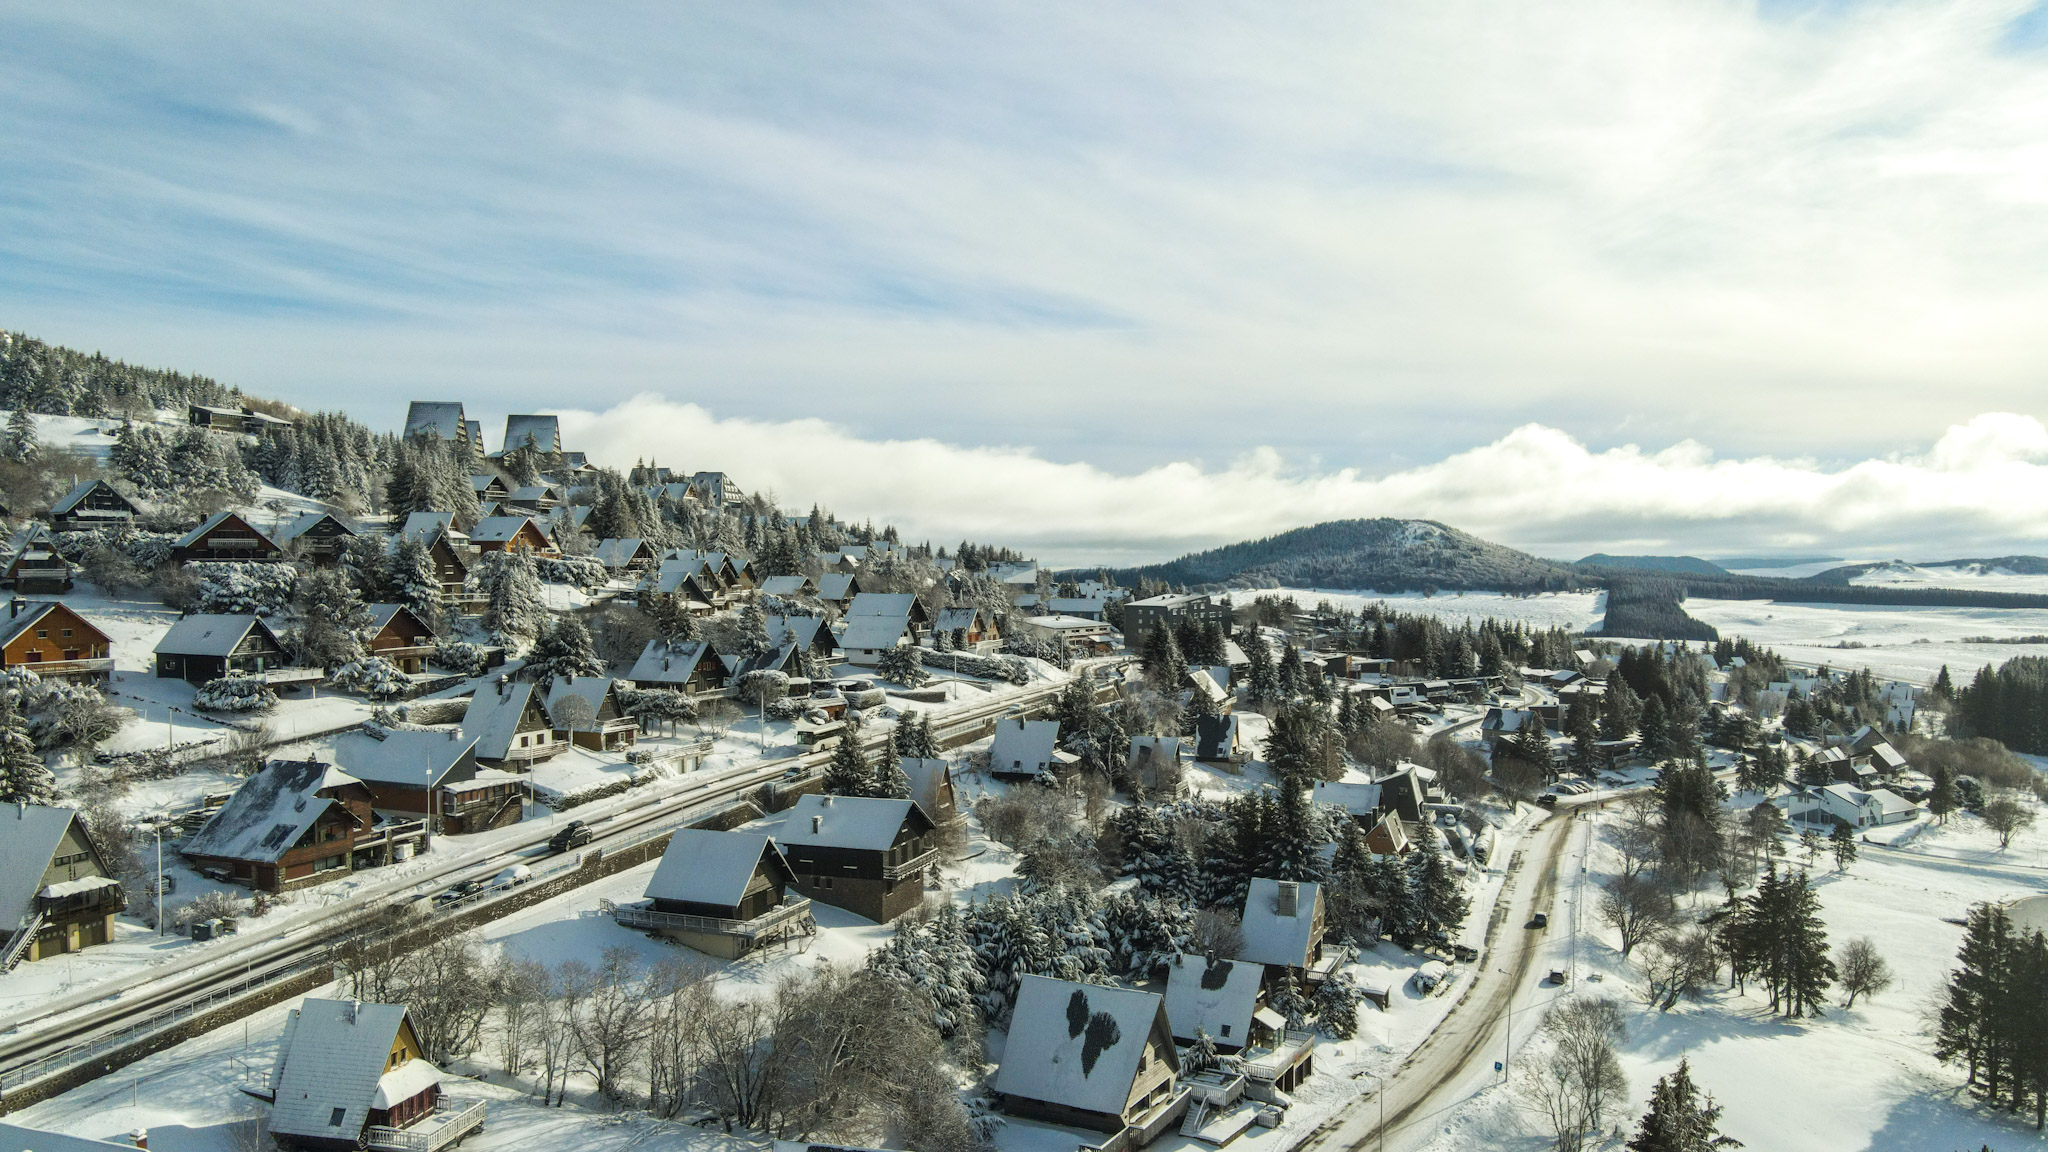 Super Besse seen from the sky, the village of chalets under the snow